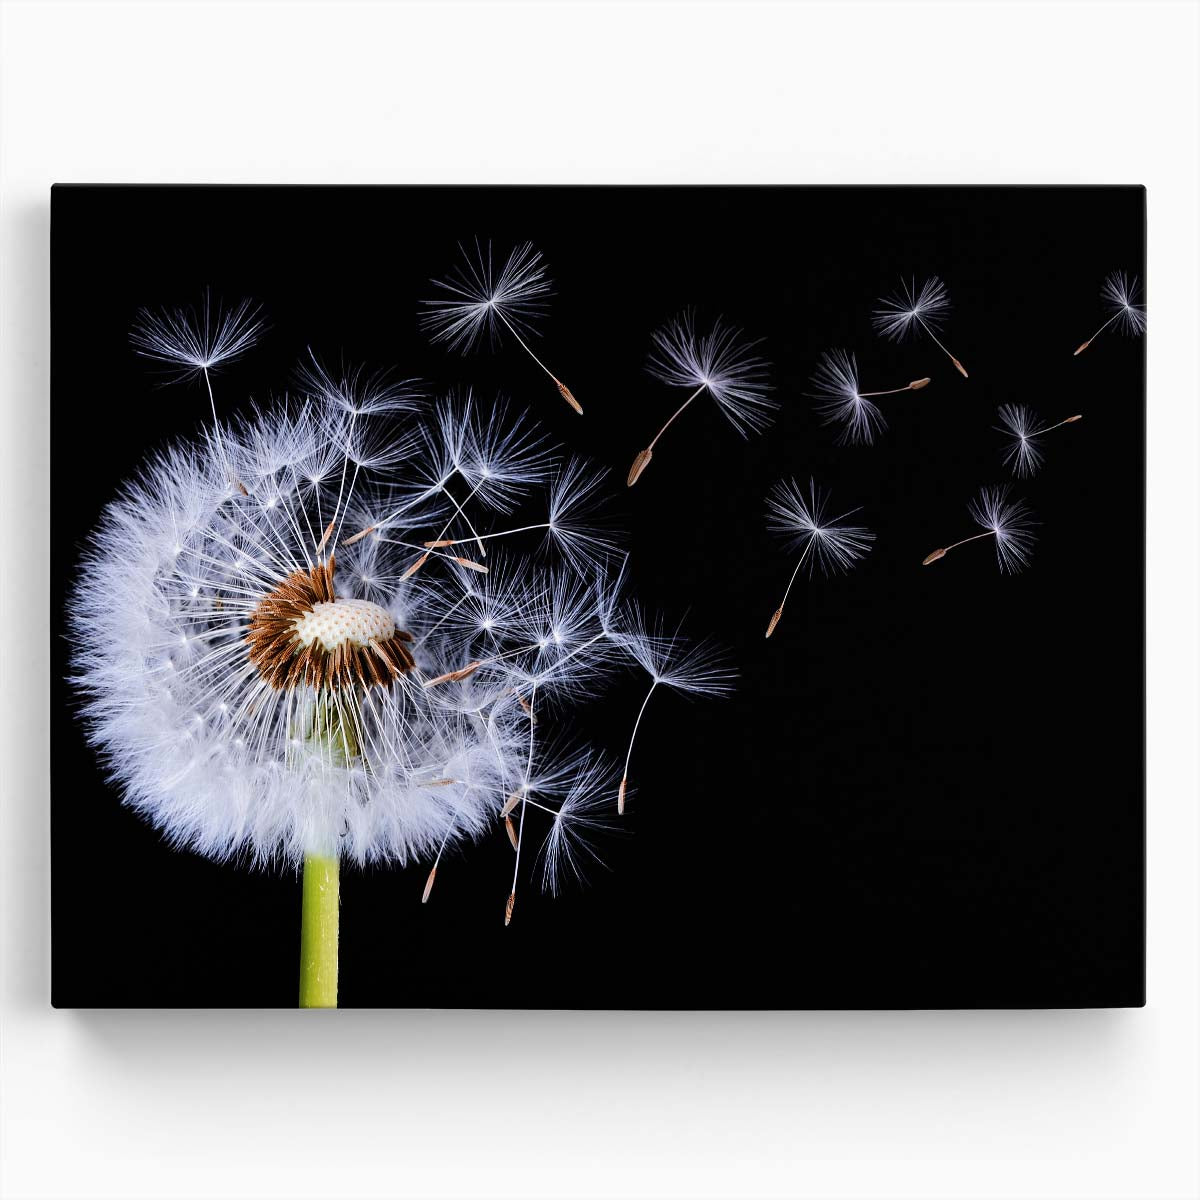 Abstract Dandelion Macro Photography Dark Floral Essence Wall Art by Luxuriance Designs. Made in USA.